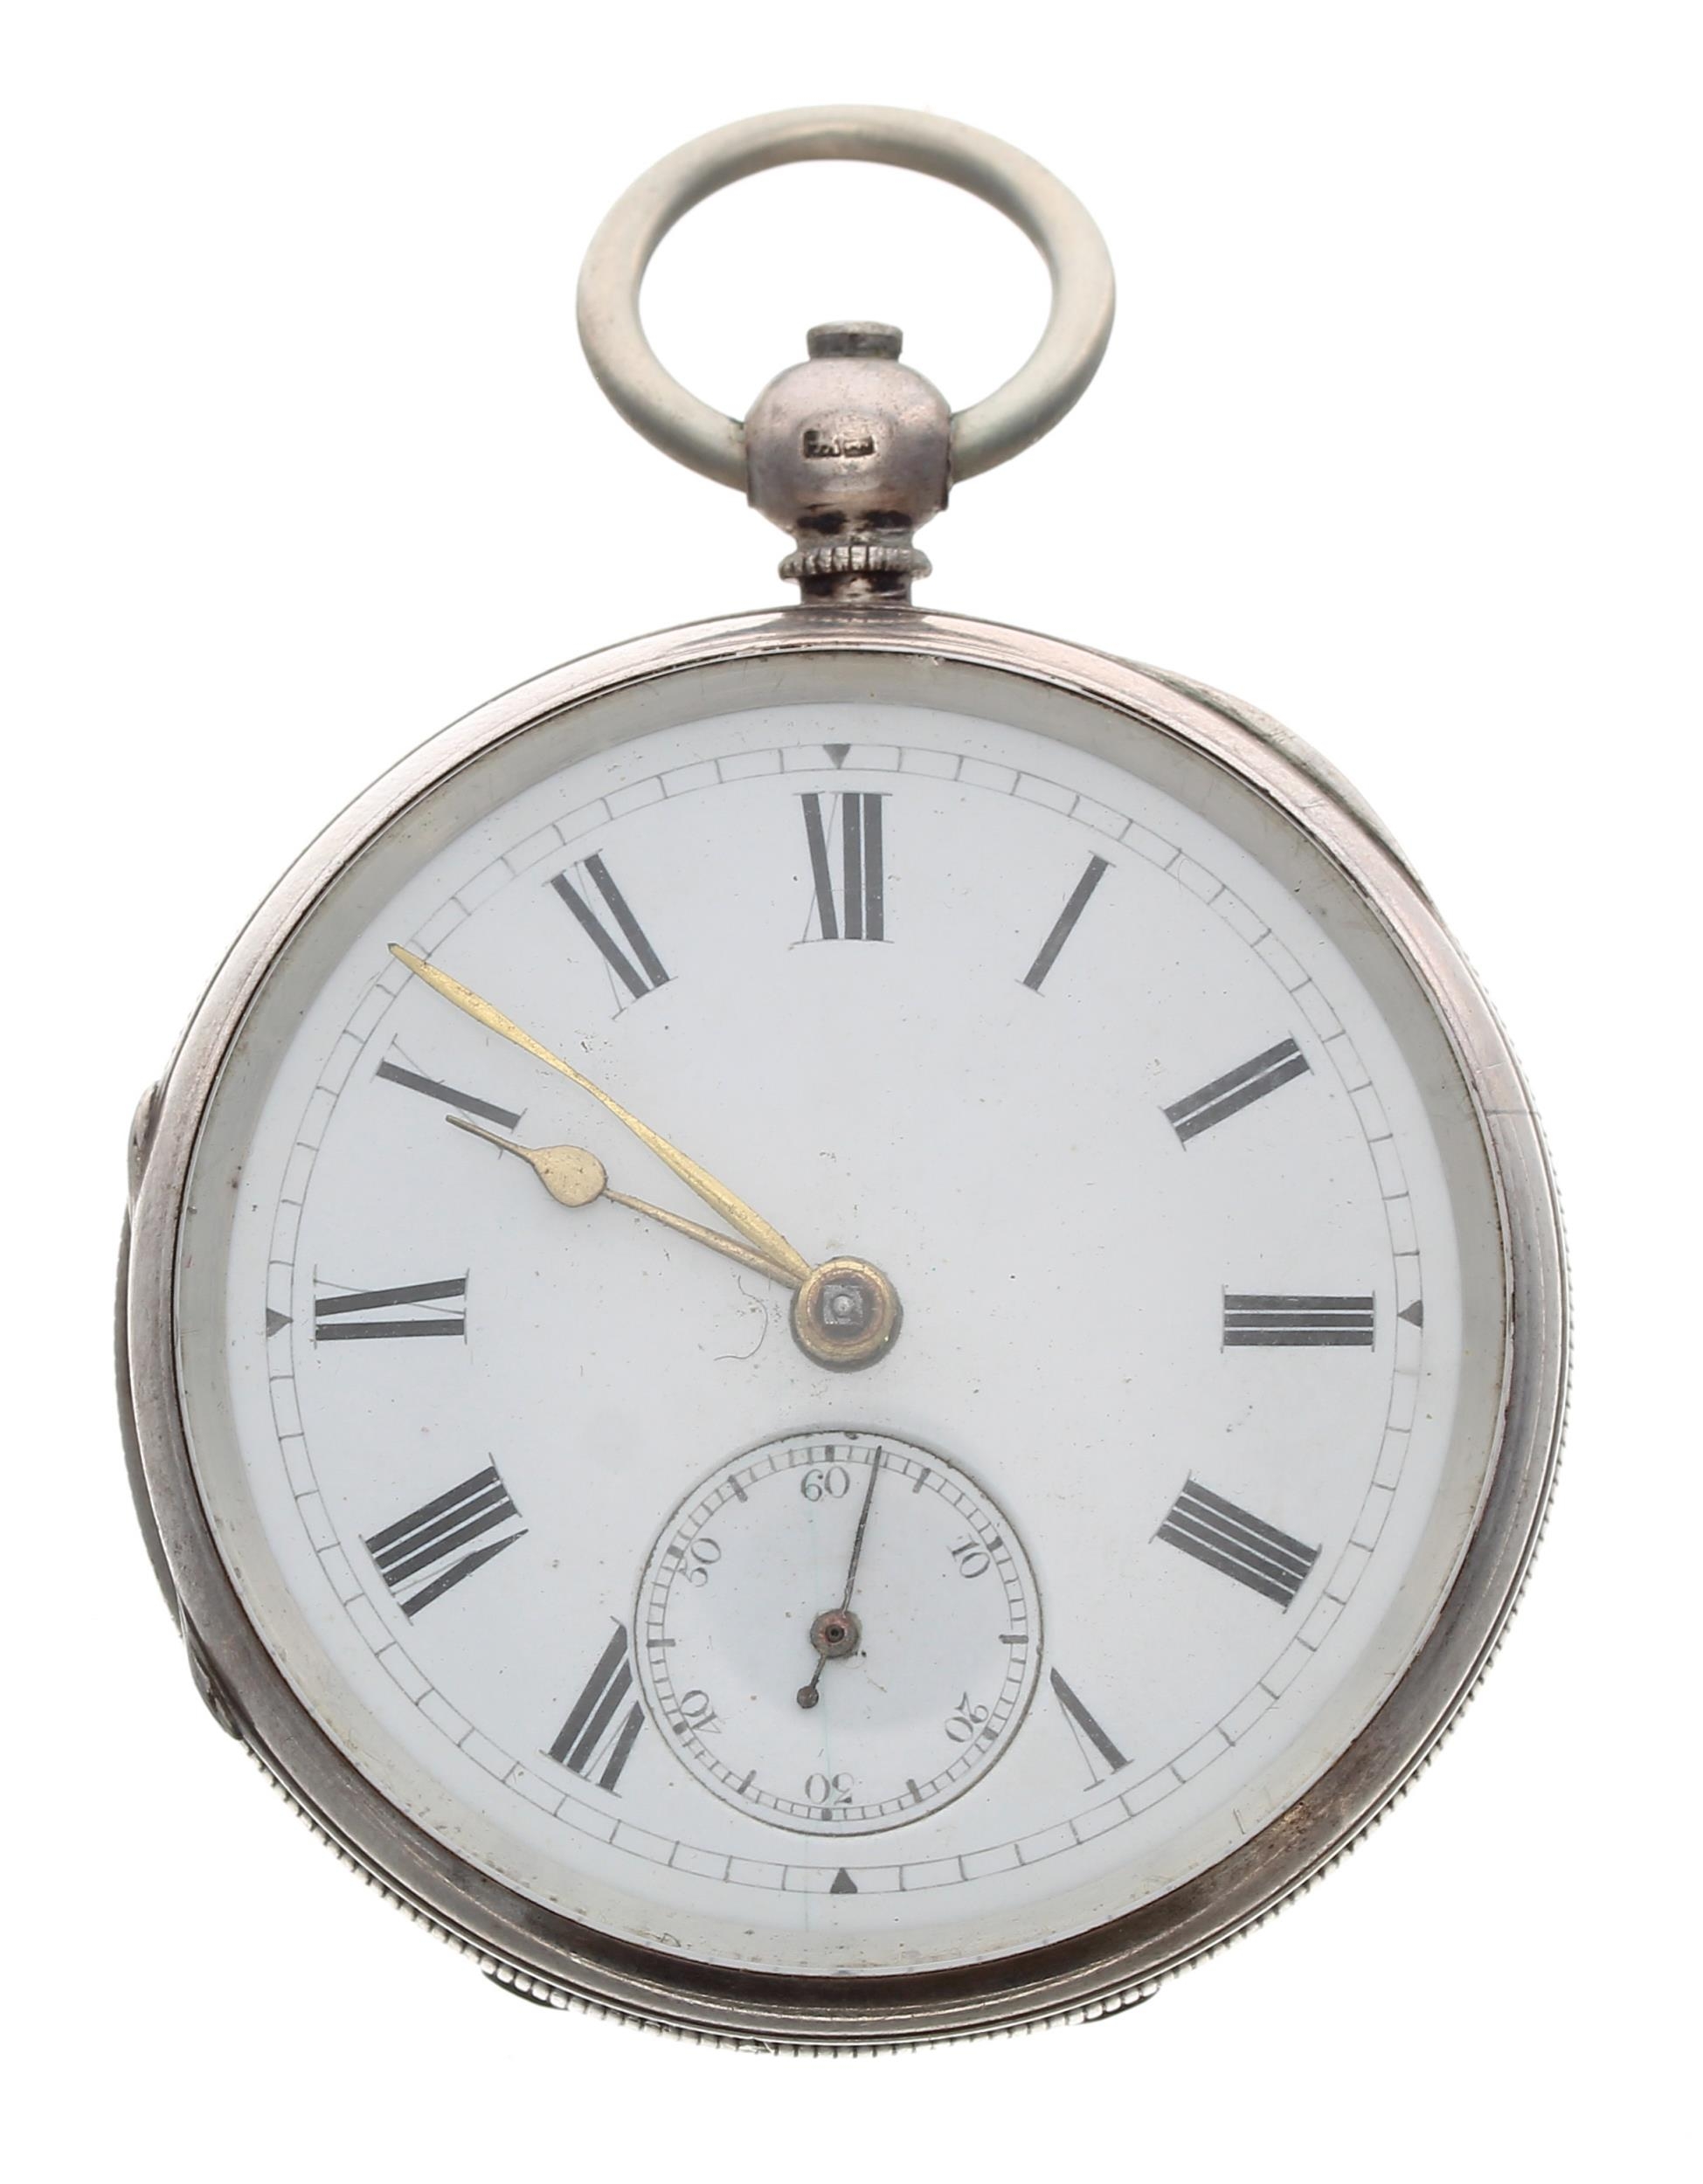 Victorian silver lever pocket watch, Birmingham 1883, the movement signed Kendal & Dent, 106